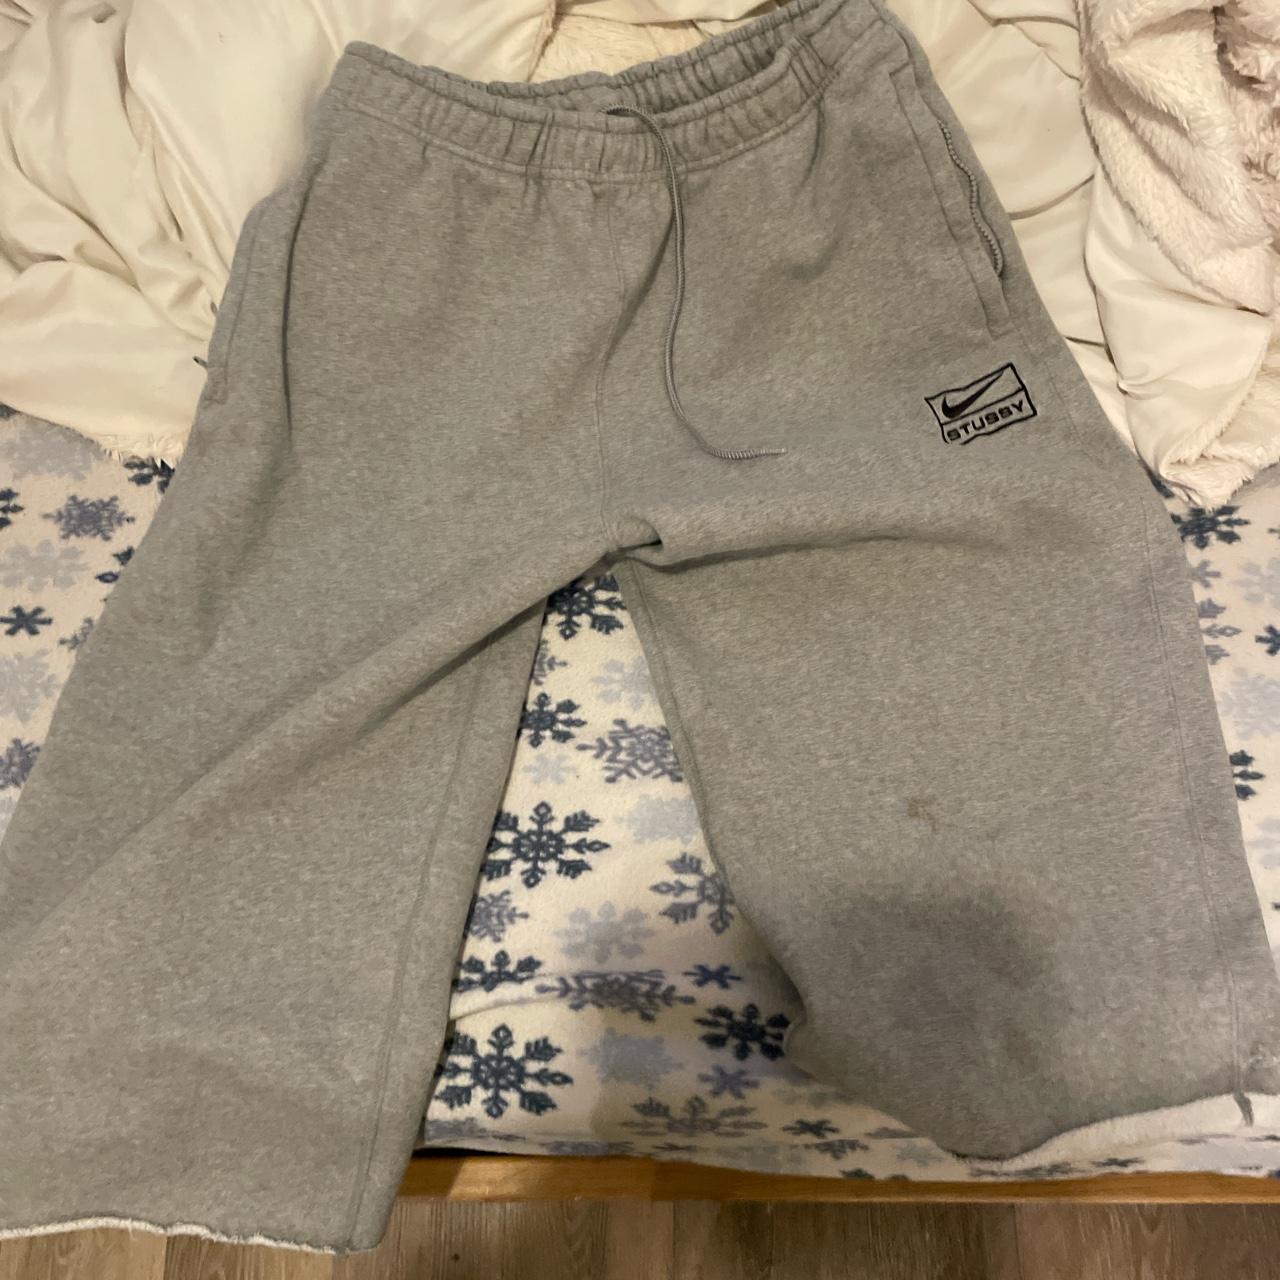 large but cropped too high stain on the knee - Depop